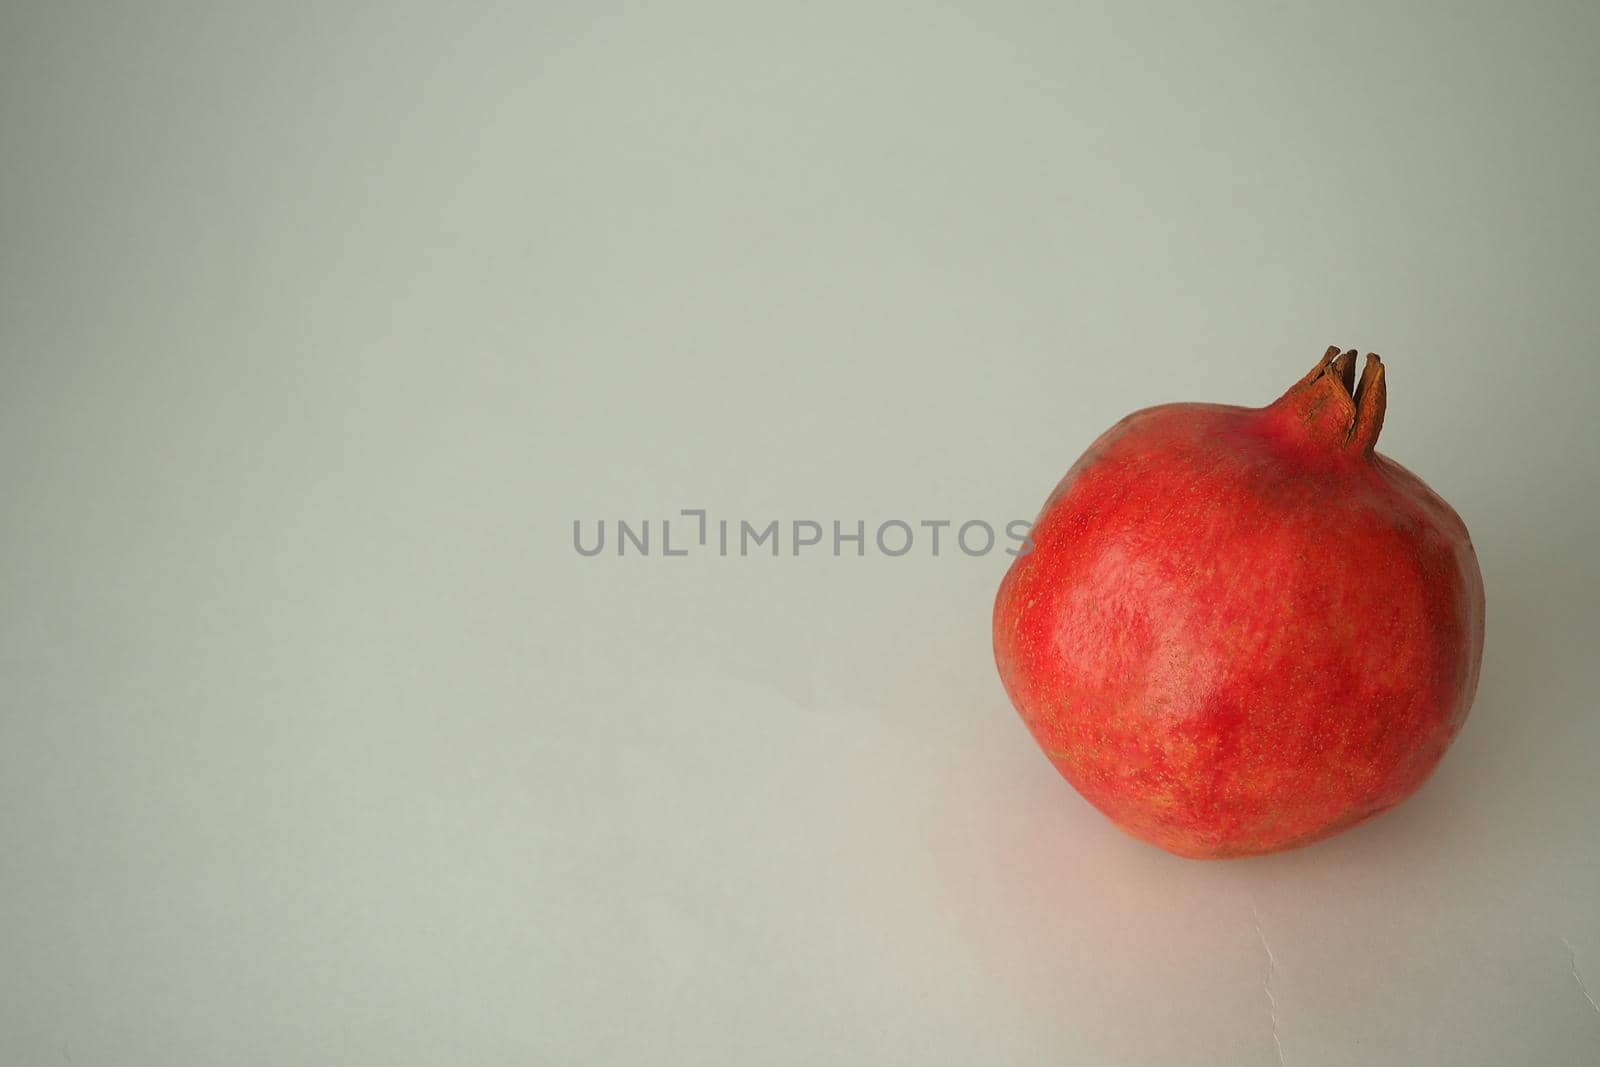 Pomegranate ripe, red round fruit. On a white background